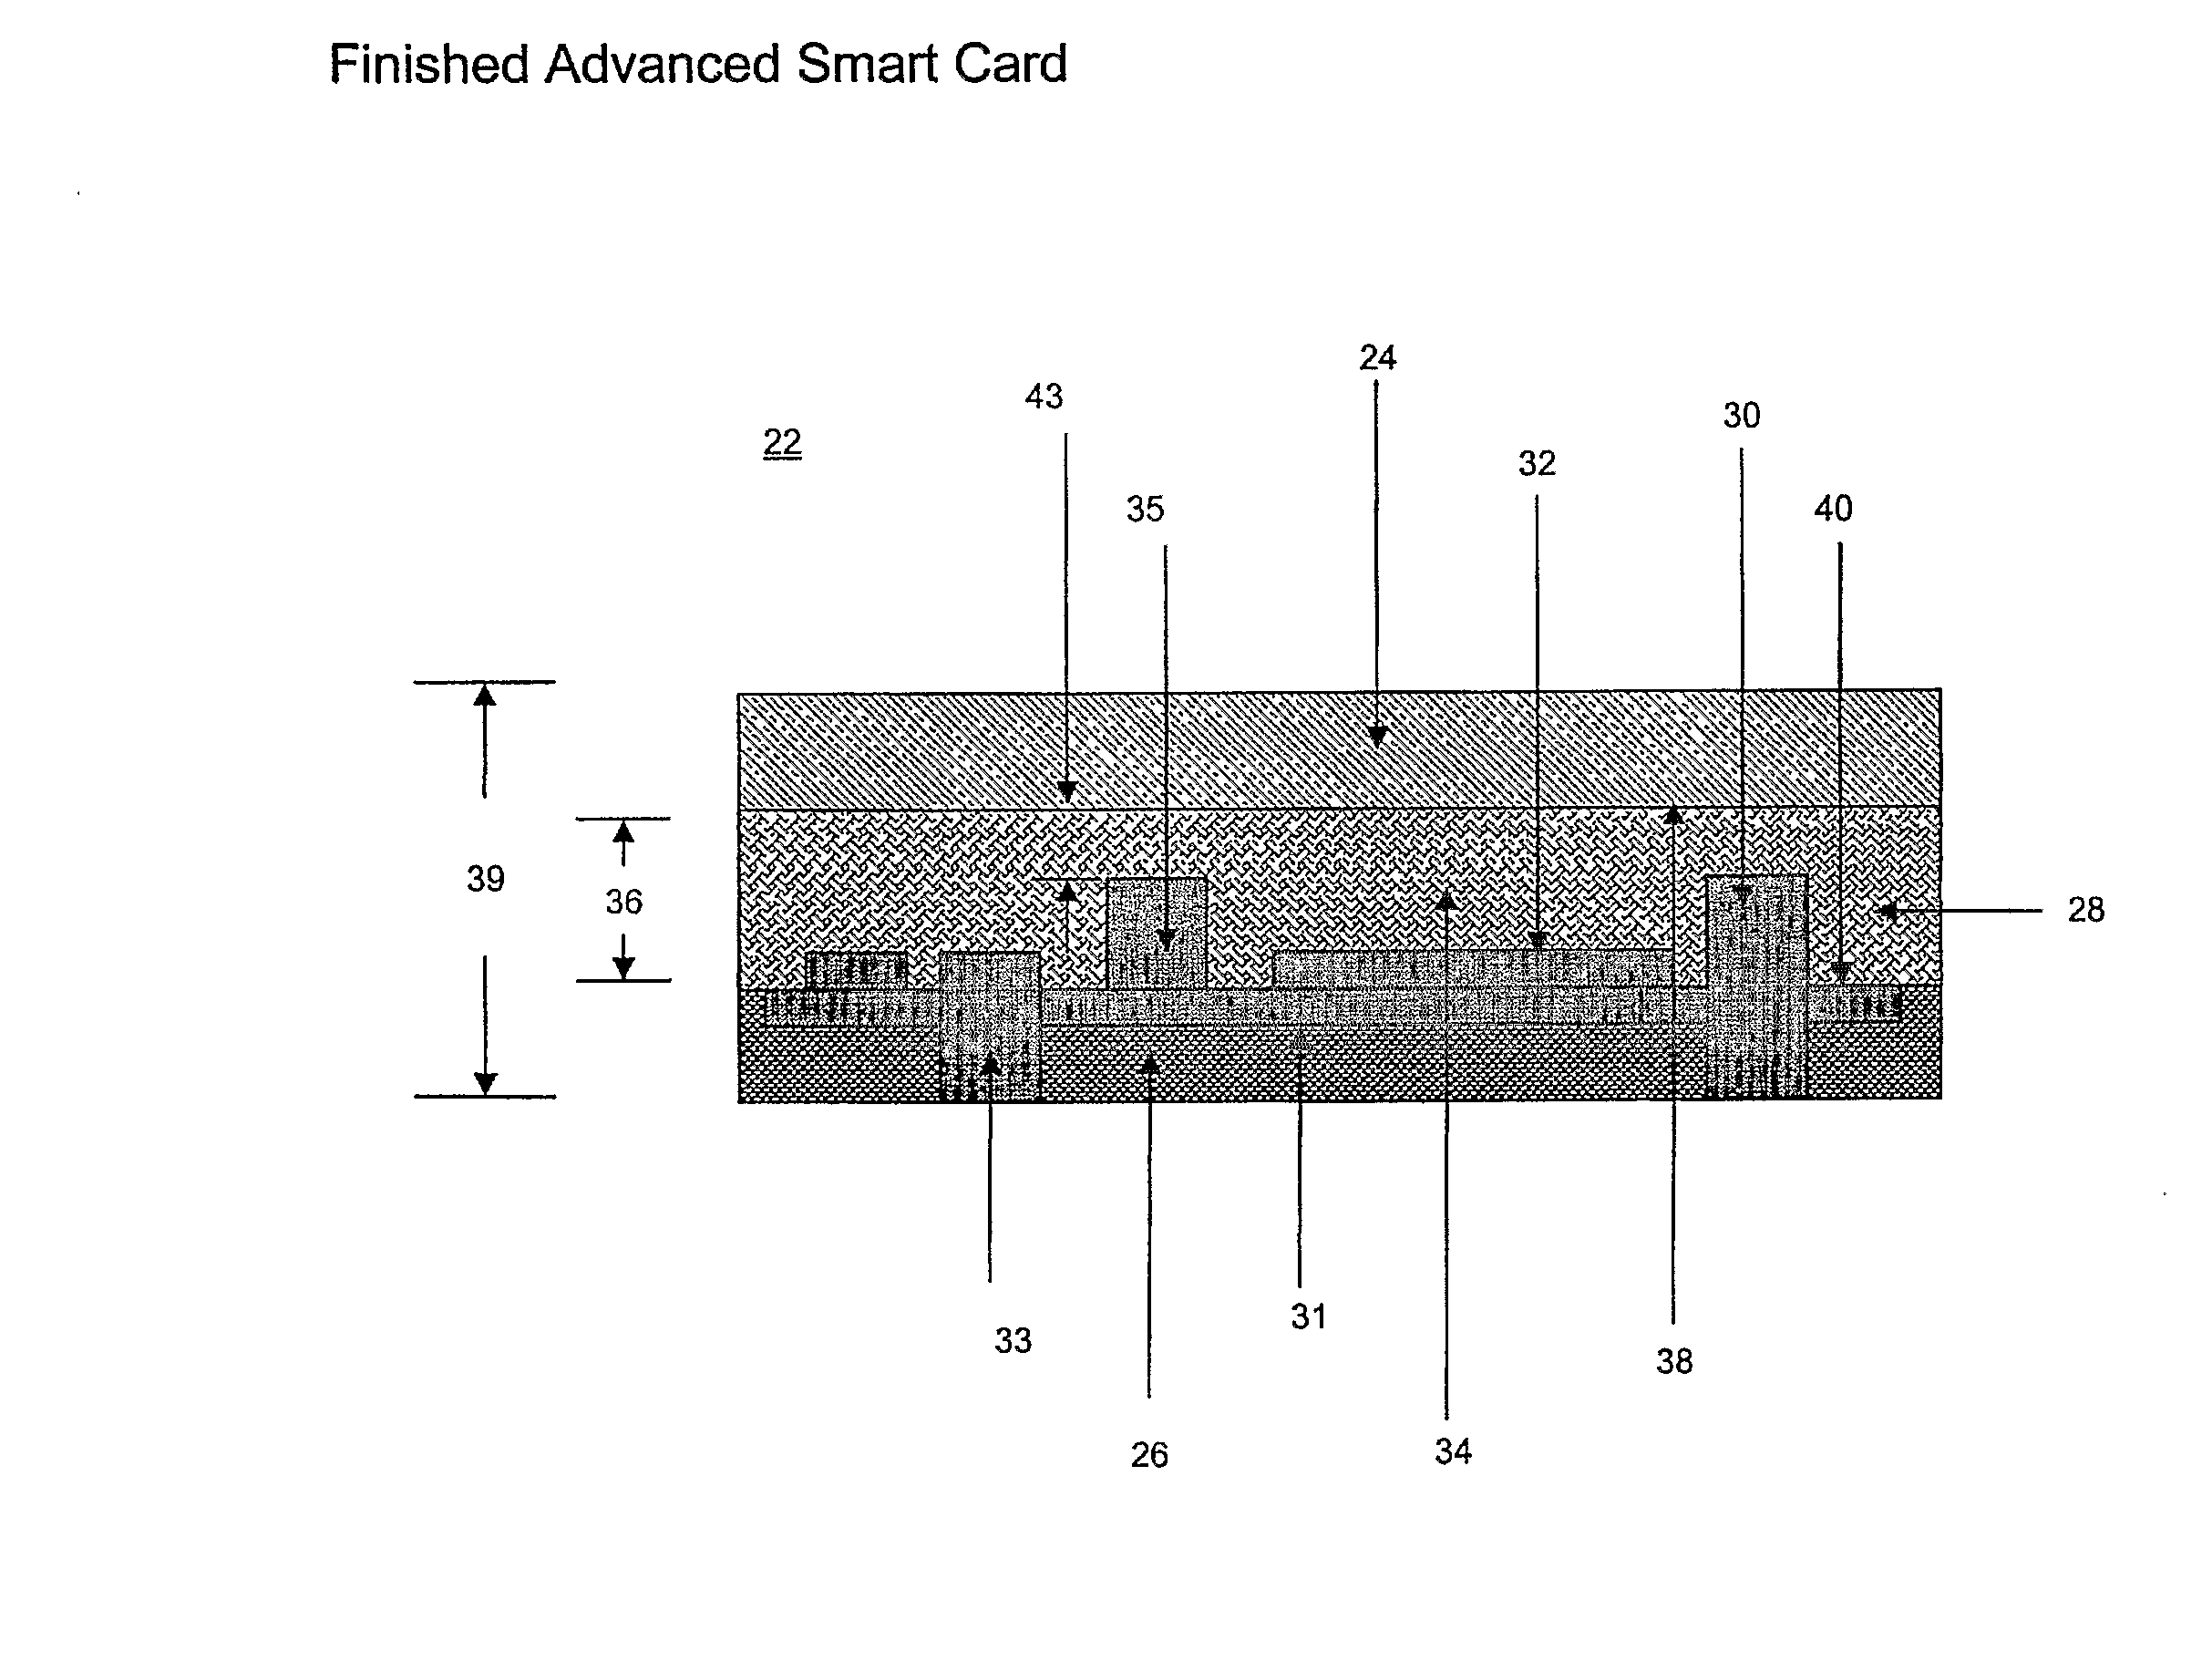 Method for Making Advanced Smart Cards With Integrated Electronics Using Isotropic Thermoset Adhesive Materials With High Quality Exterior Surfaces